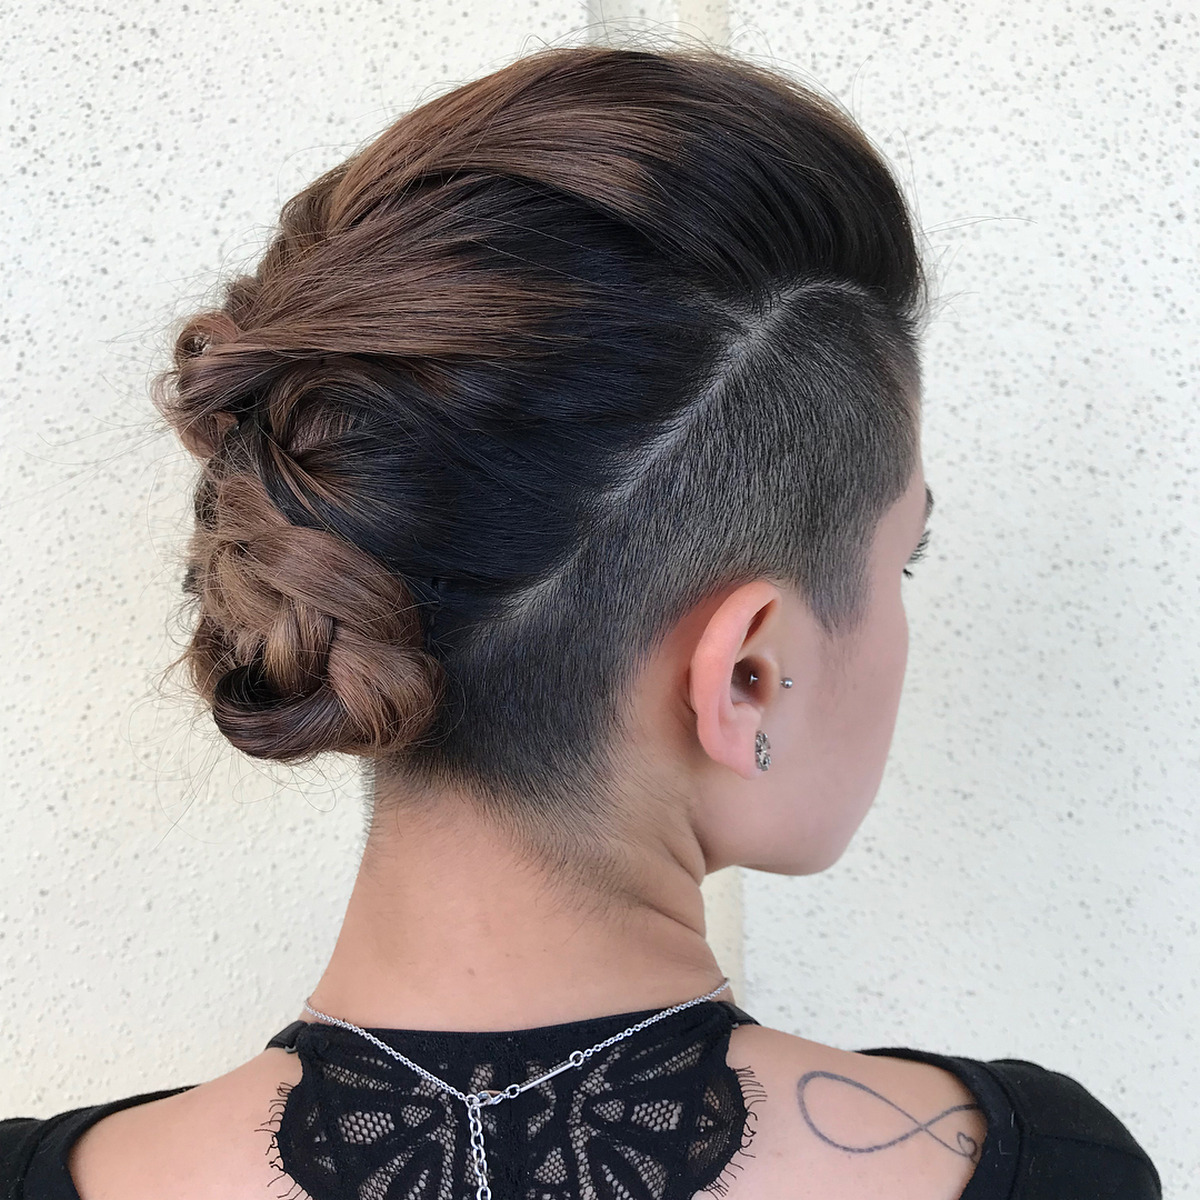 Mohawk Updo With Buzzed Sides